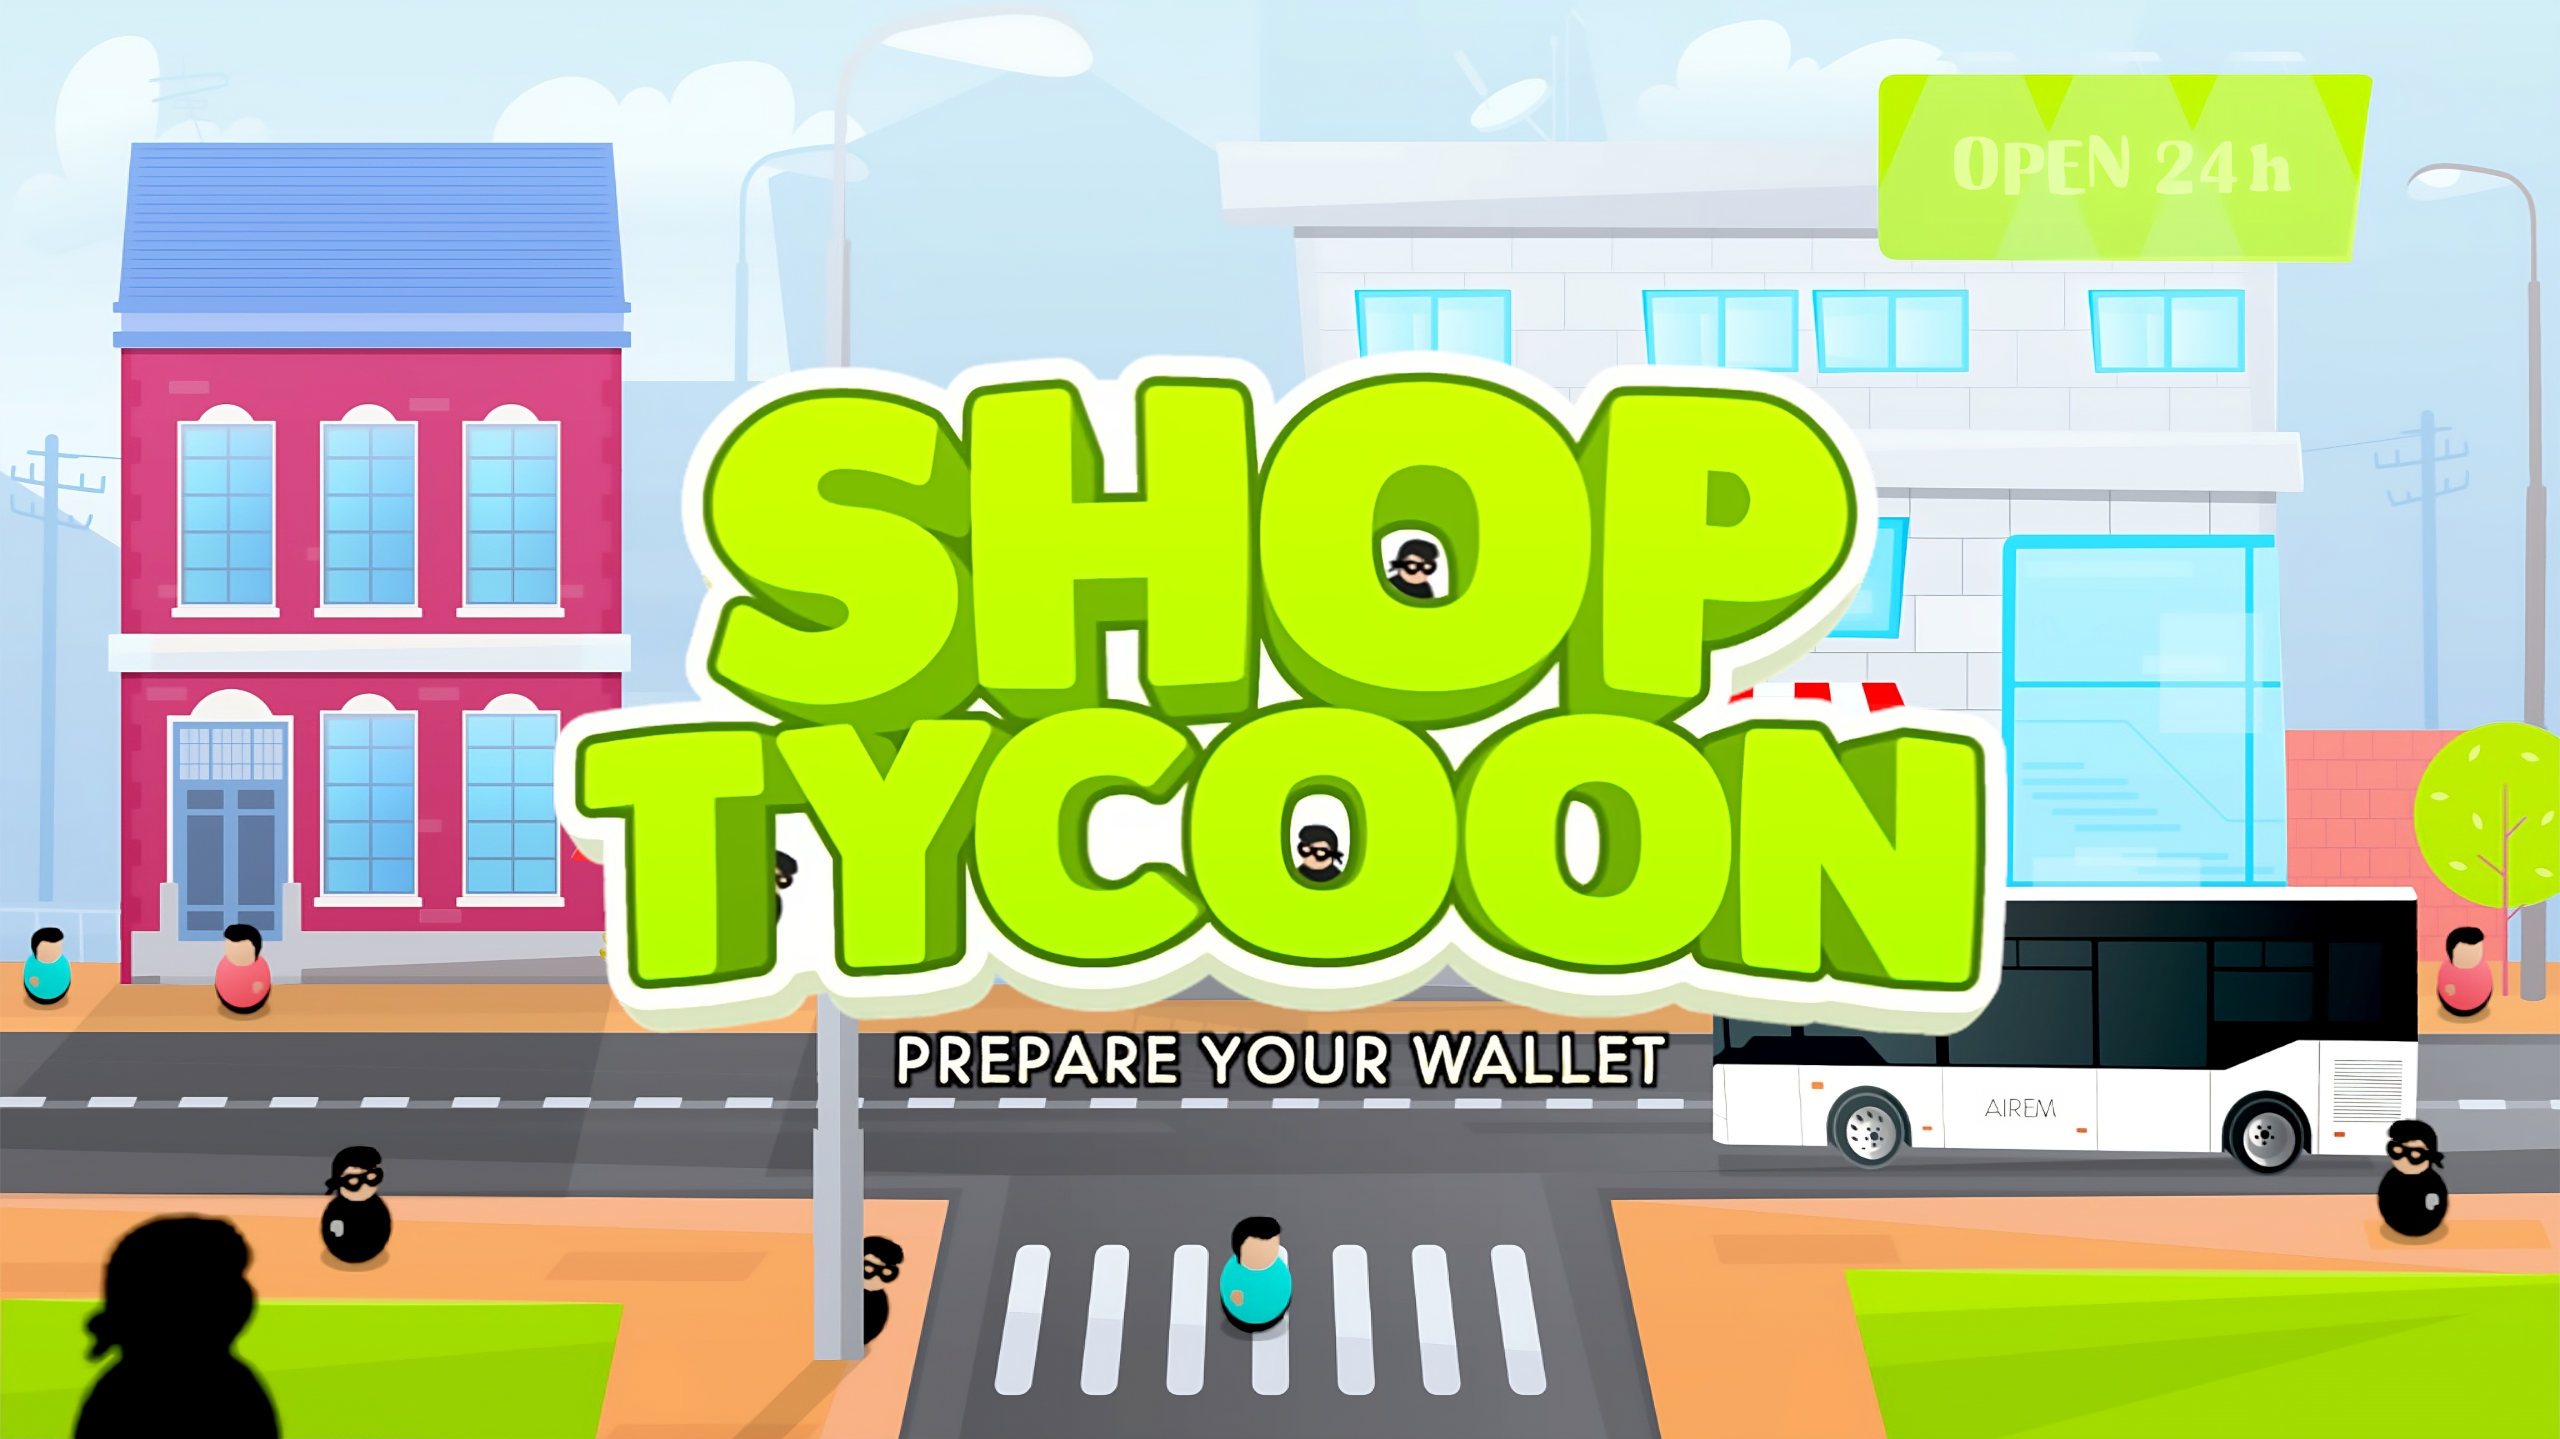 Shop Tycoon   Prepare Your Wallet Download and Buy Today   Epic